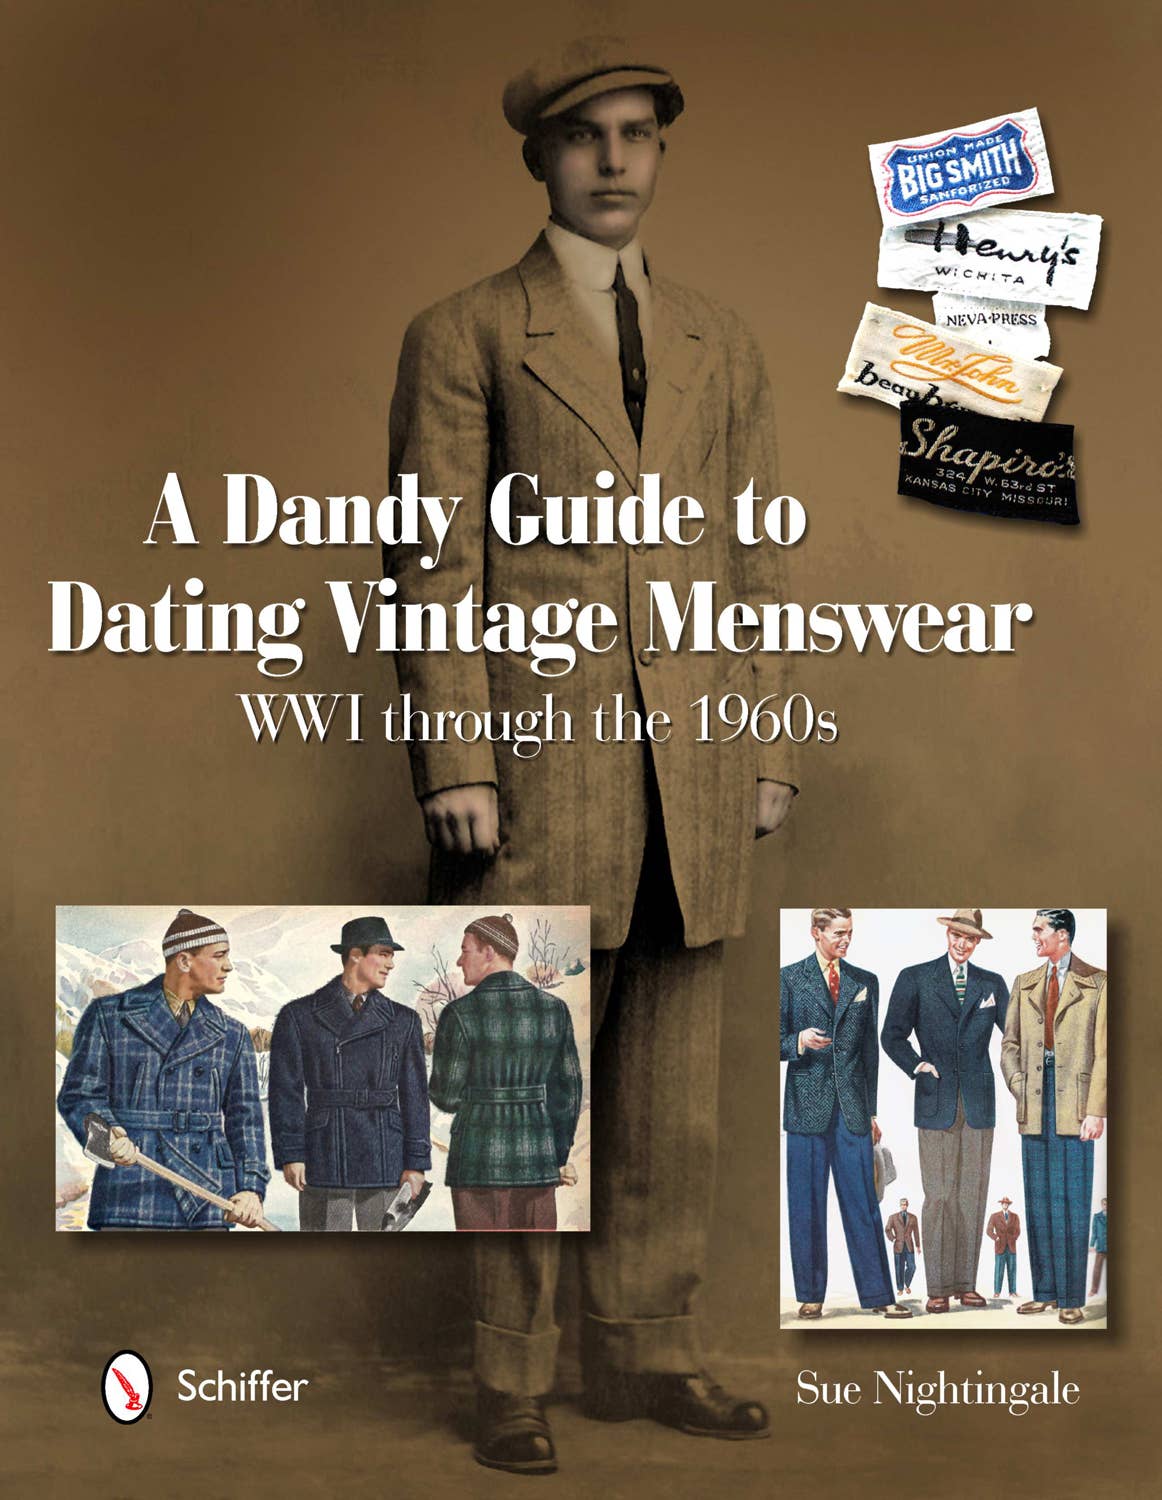 A Dandy Guide to Dating Vintage Menswear